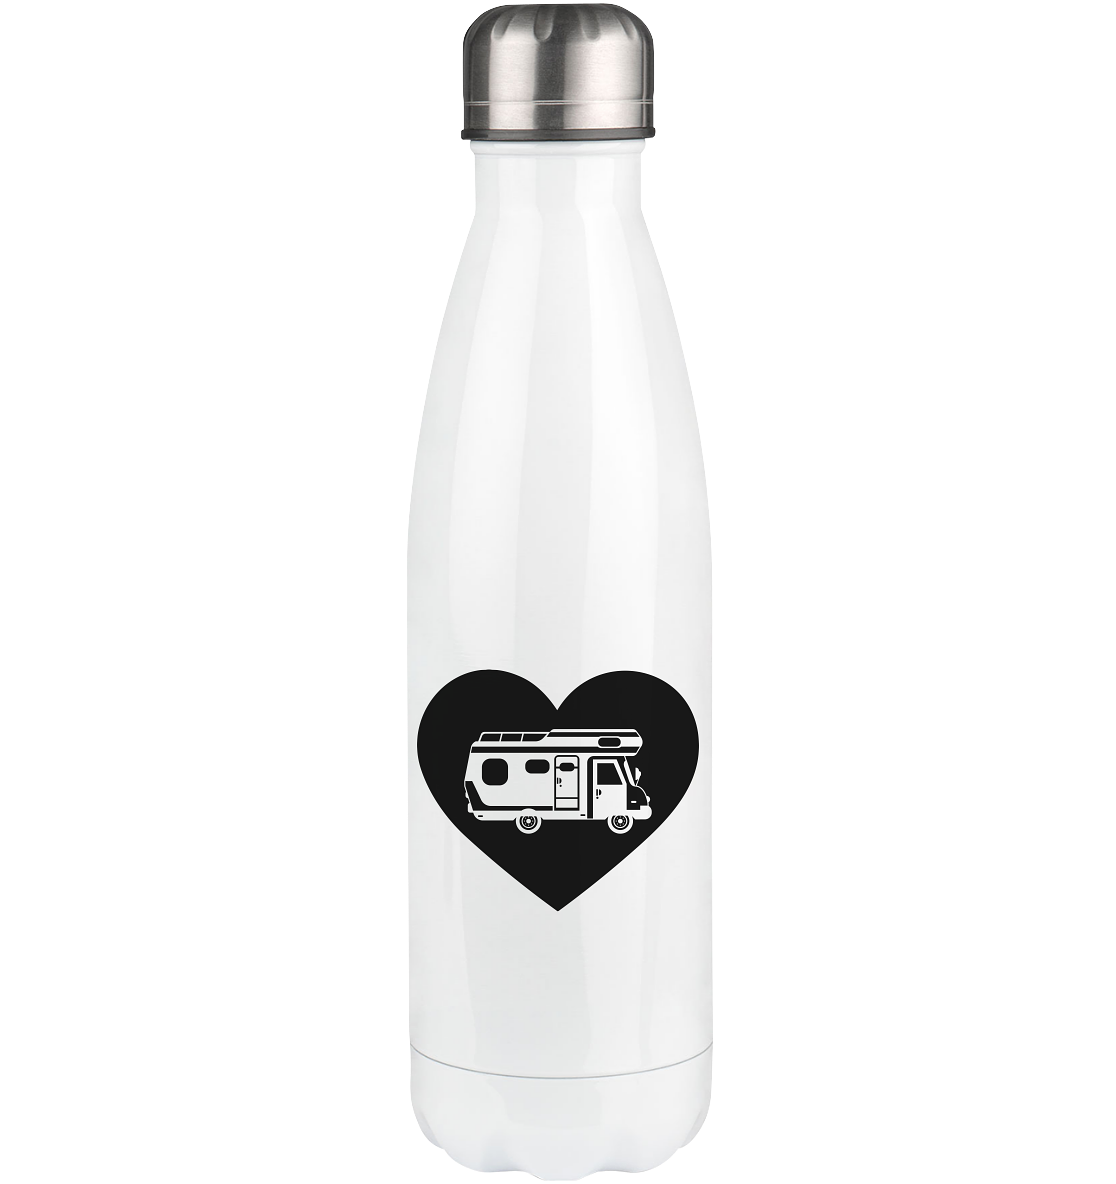 Heart 1 and Camping - Edelstahl Thermosflasche camping 500ml